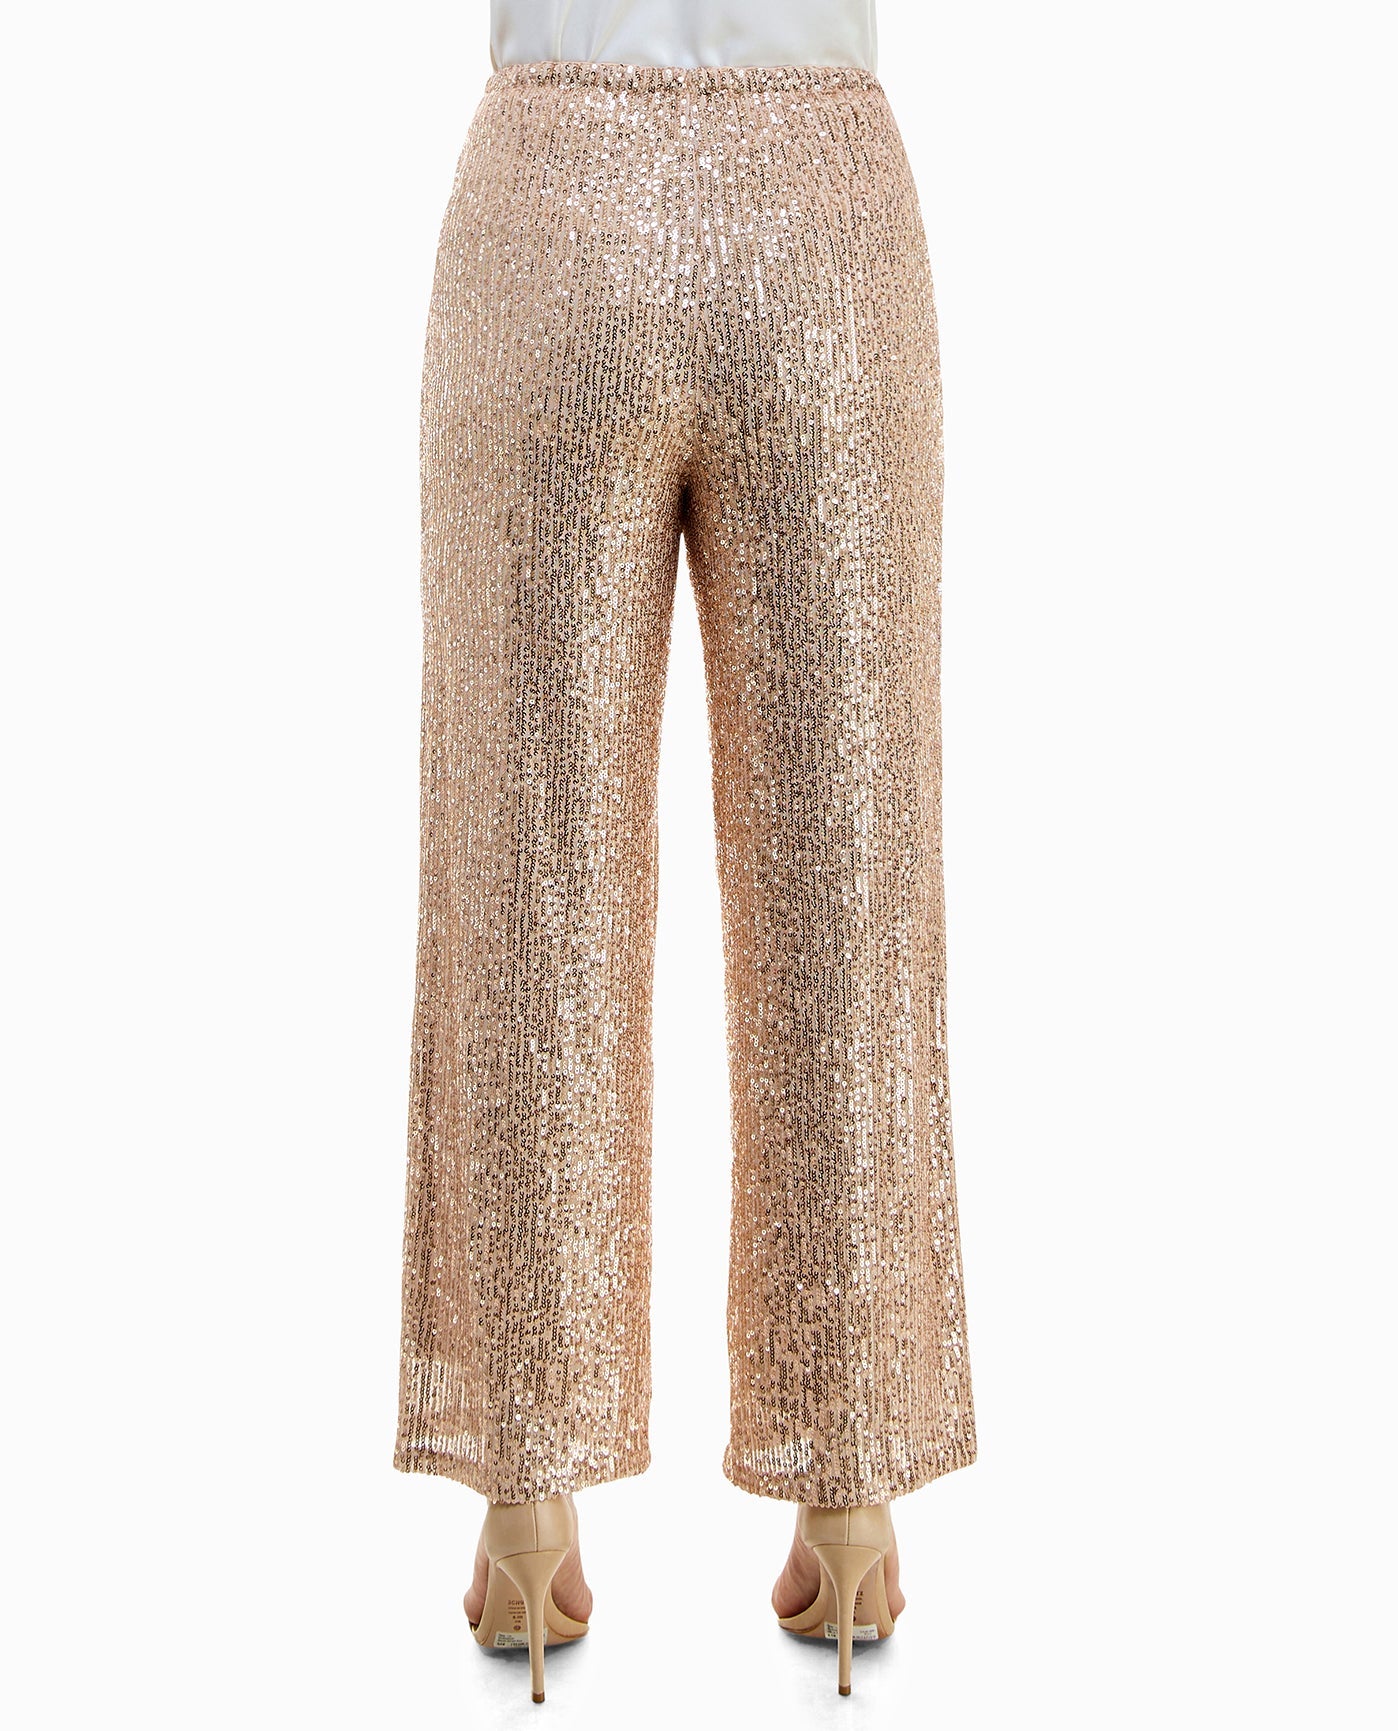 Sparkly Trousers for Women Casual-High Waist Stretchy Palazzo Pants Shiny  Party Clubwear Bling Glitter Loose Bottoms Gold at Amazon Women's Clothing  store